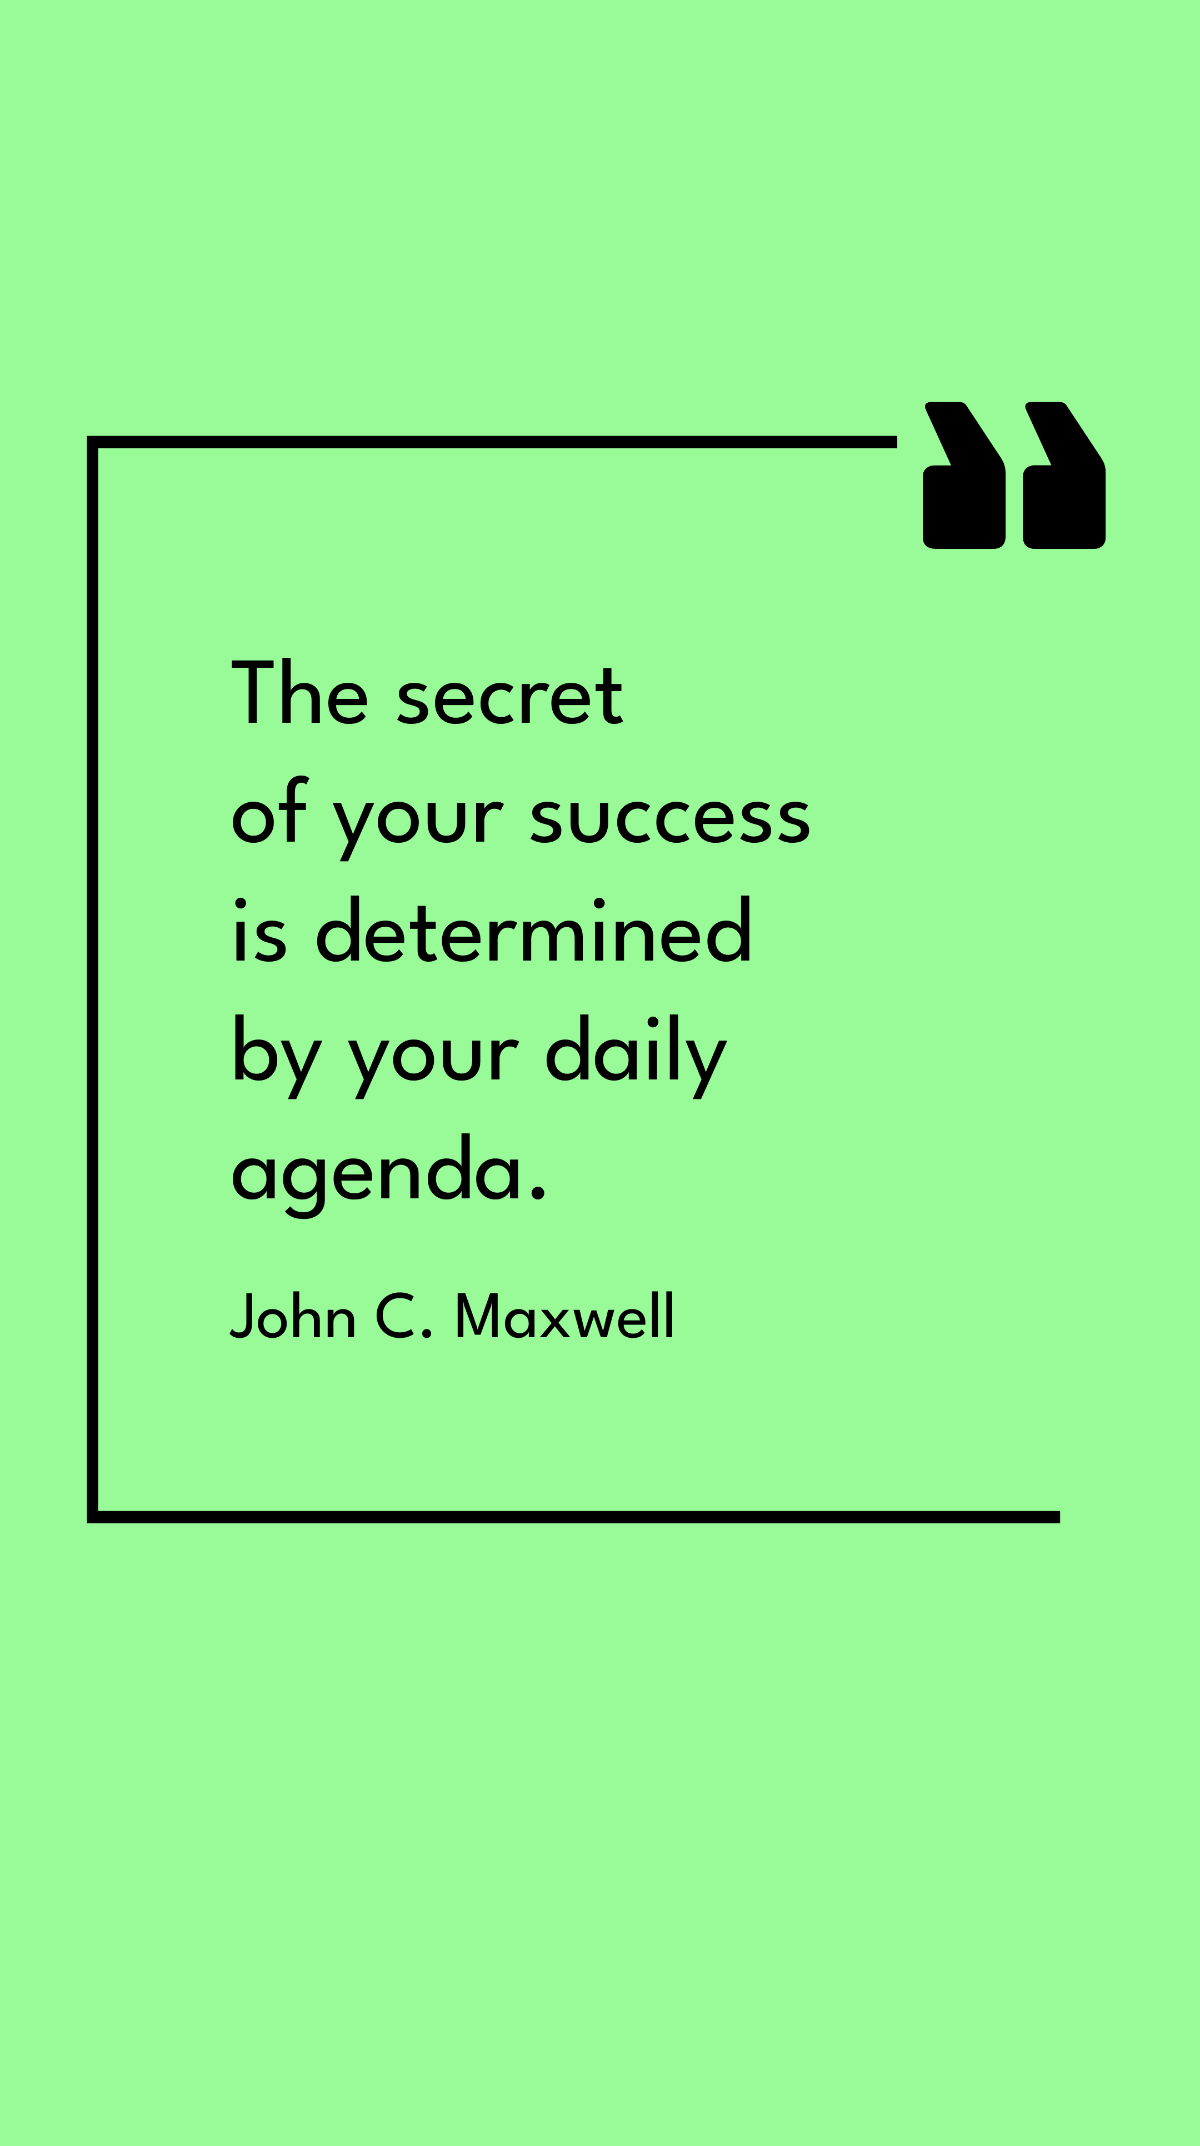 John C. Maxwell - The secret of your success is determined by your daily agenda.